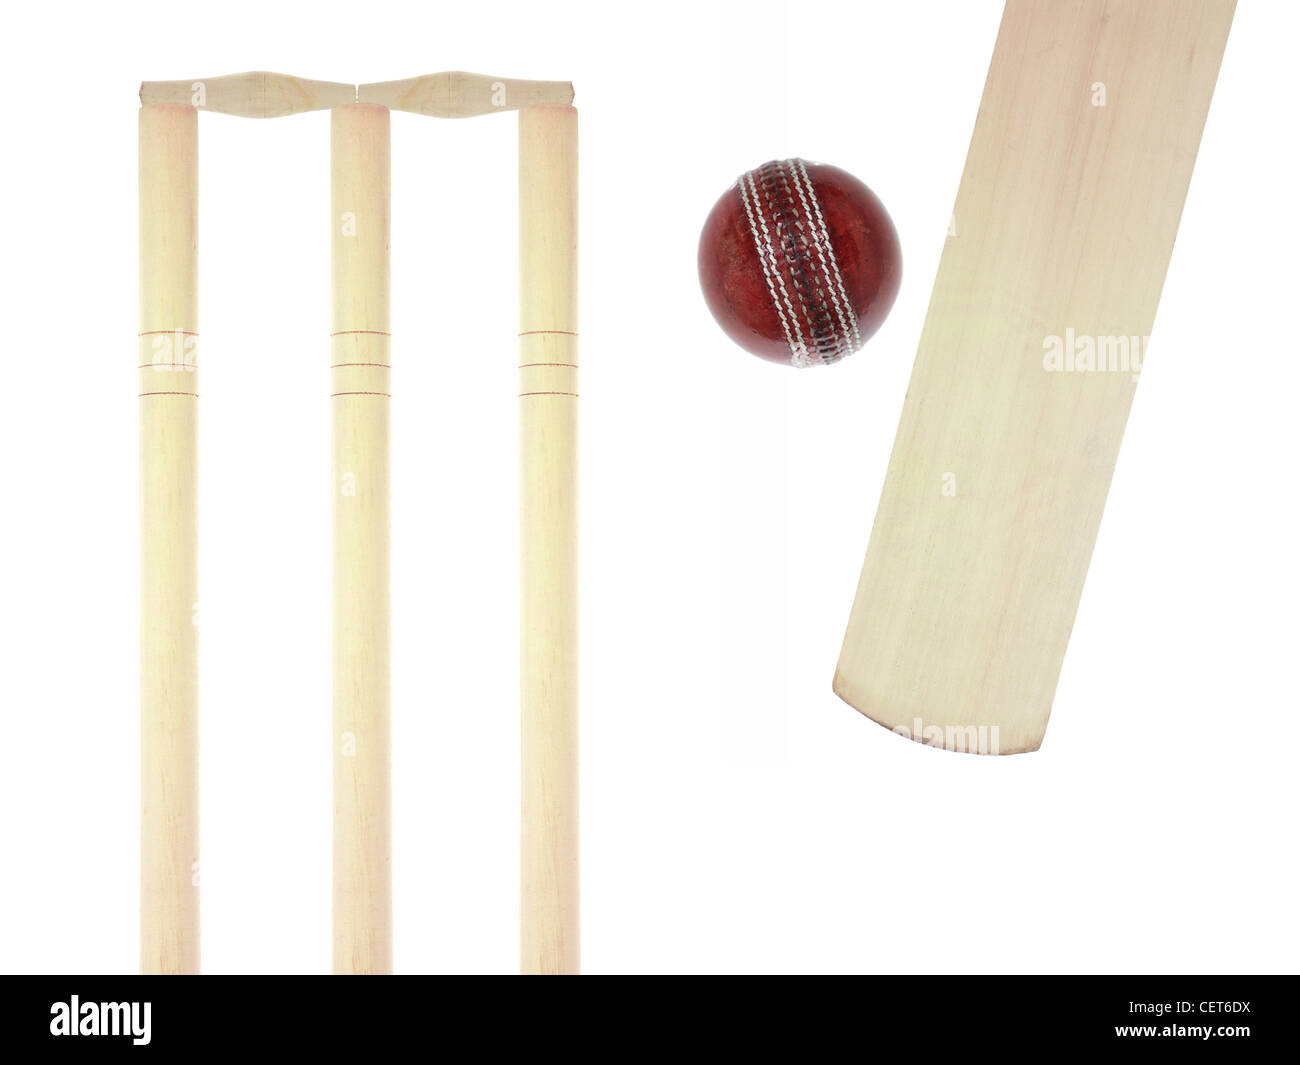 Overhead View Of Cricket Accessories And Tools Isolated On White Surface  Stock Photo - Alamy